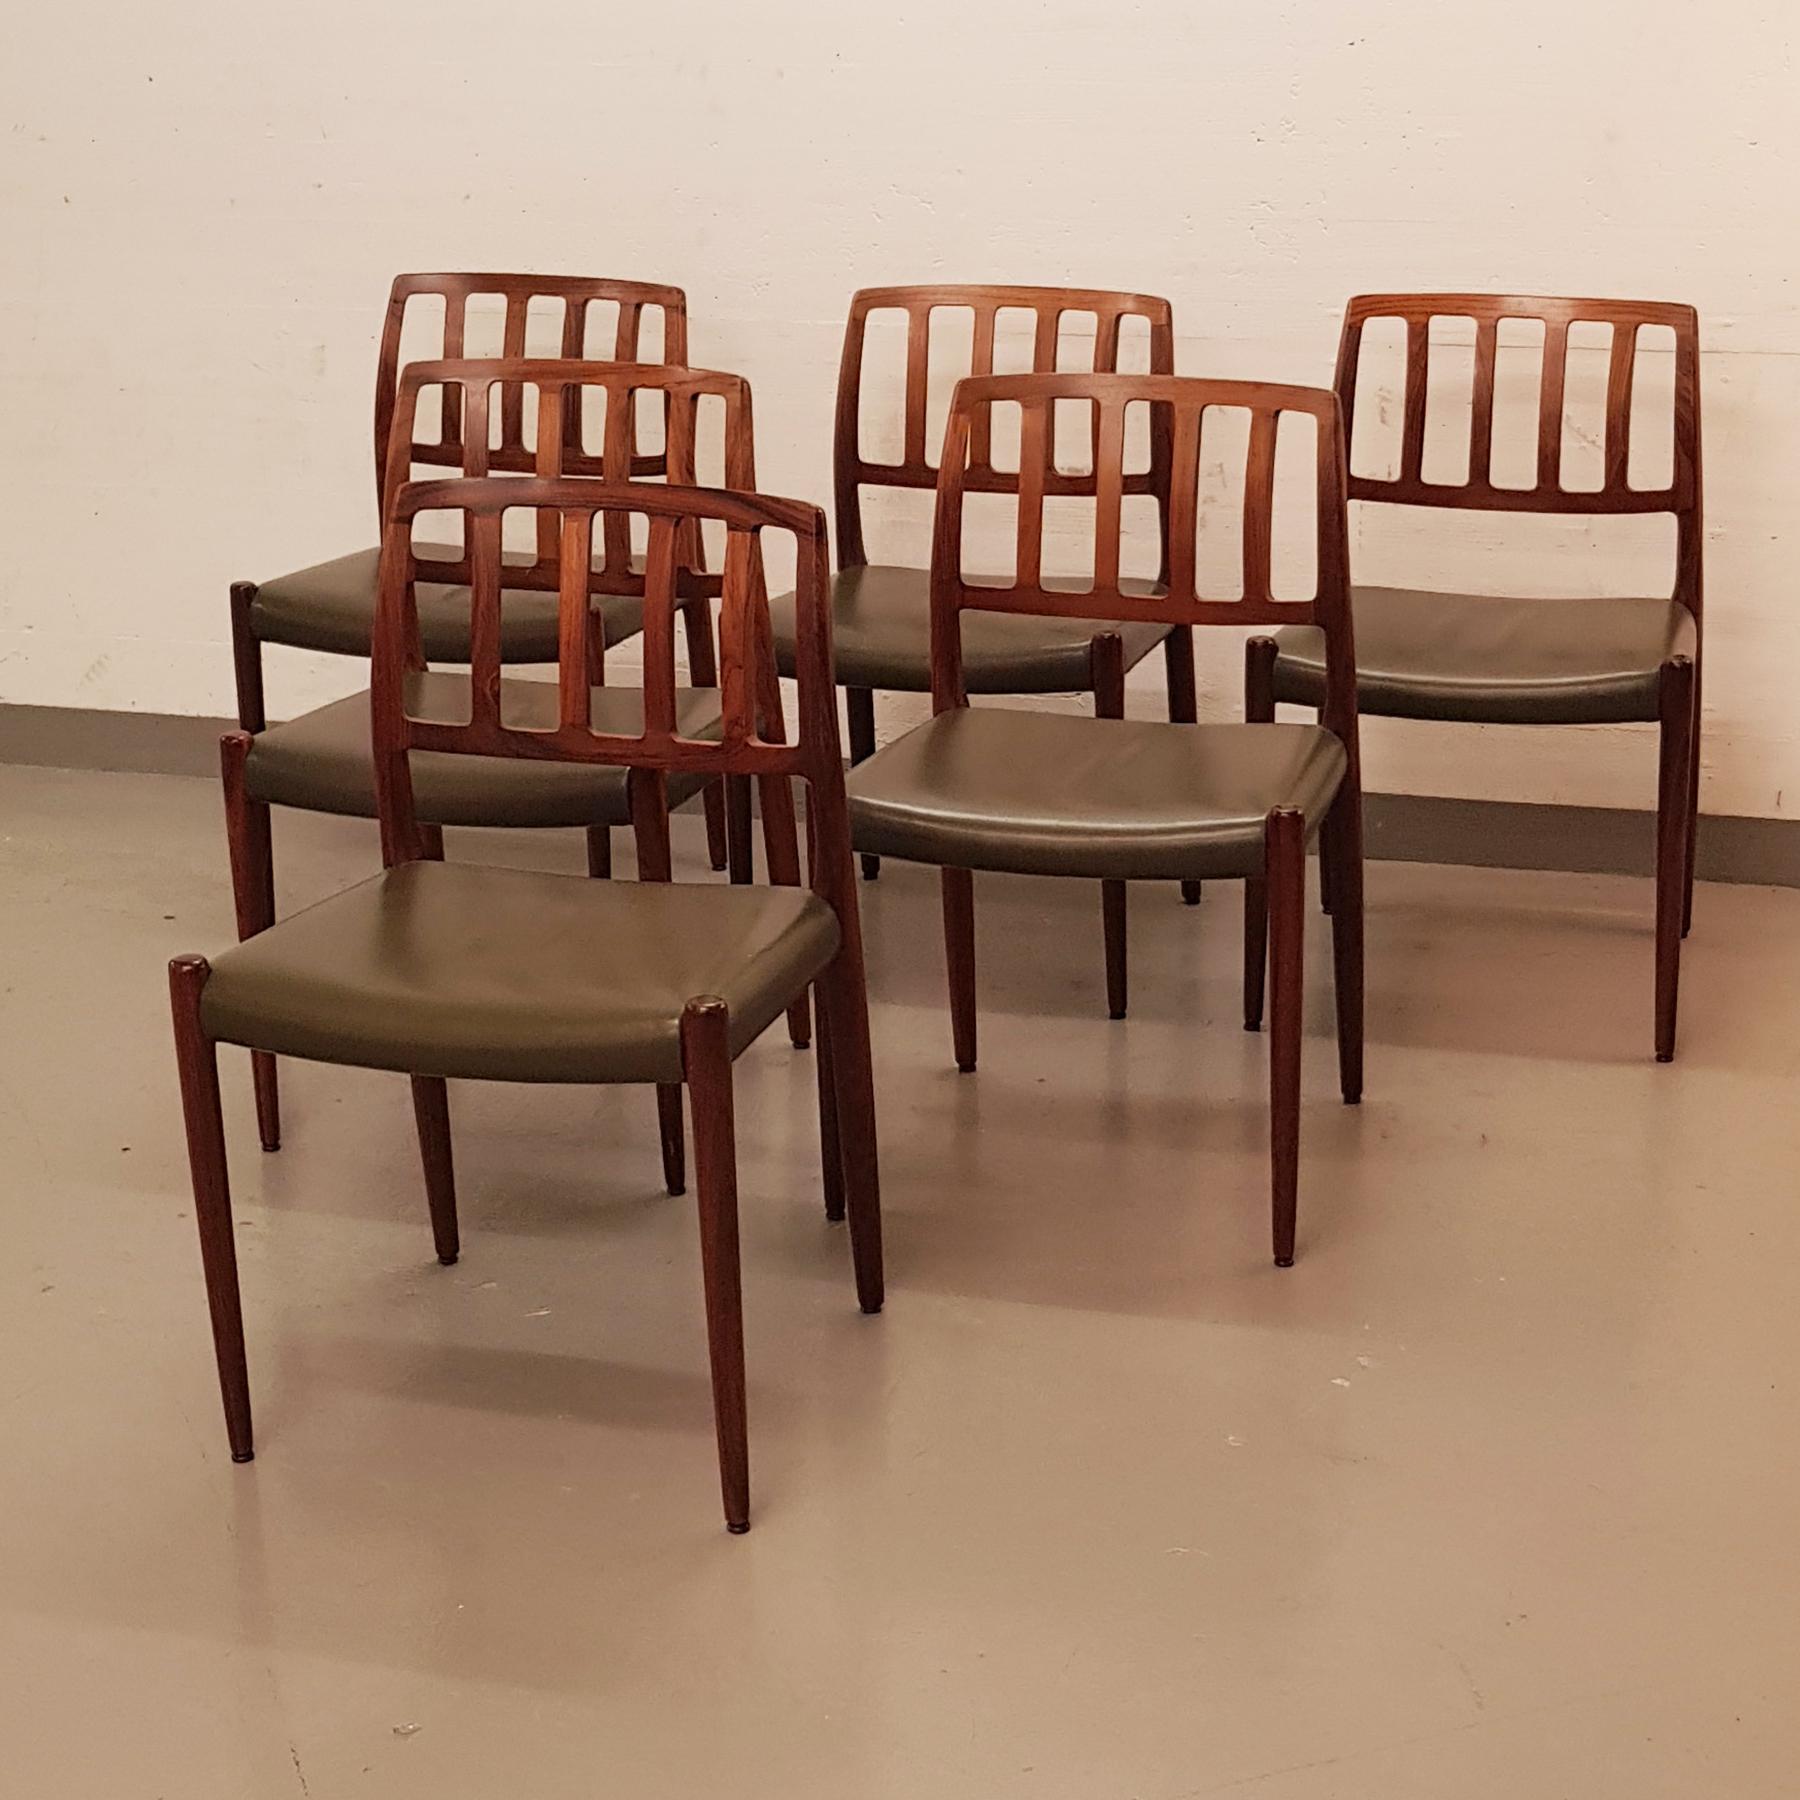 Set of 6 original dining chairs, rosewood and olive leather.
Comfortable, stable, absolutely tight, the n° 83 is a real pleasure to sit and see.
This set wears a nice patina, and show the knowledge of the creator, Niels O. Møller.